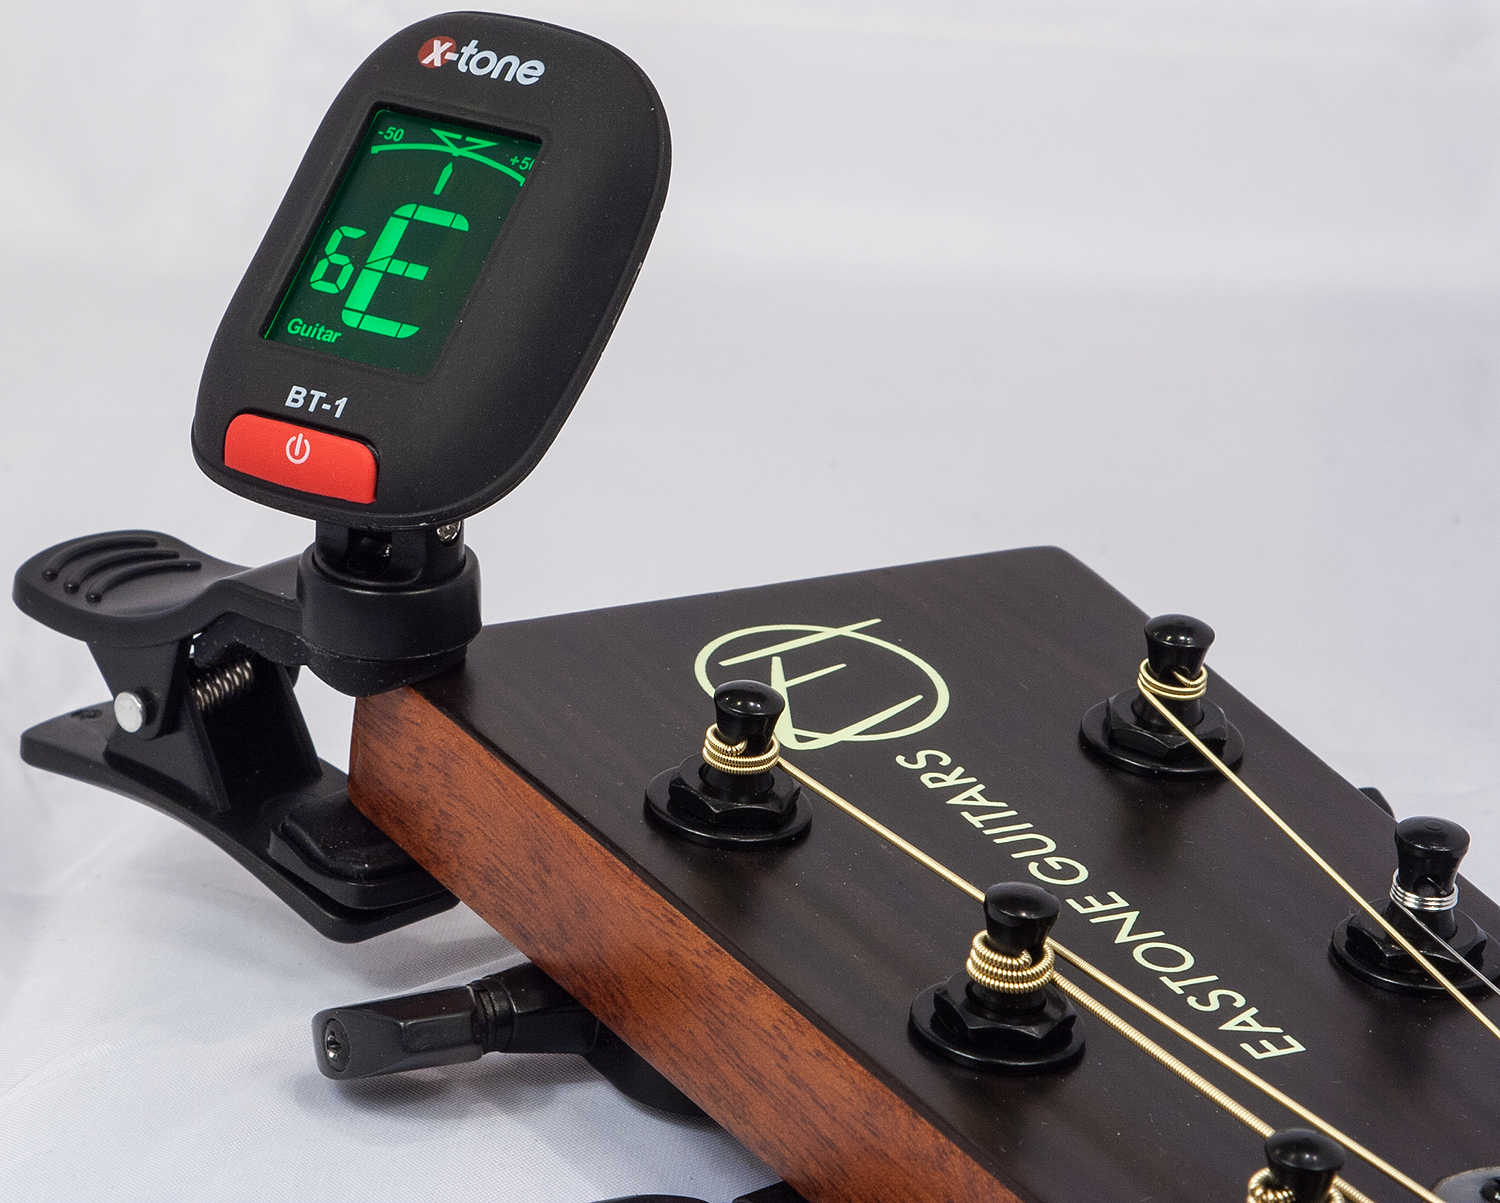 X-tone 3110 Clip-on Tuner Pince - Guitar tuner - Variation 3